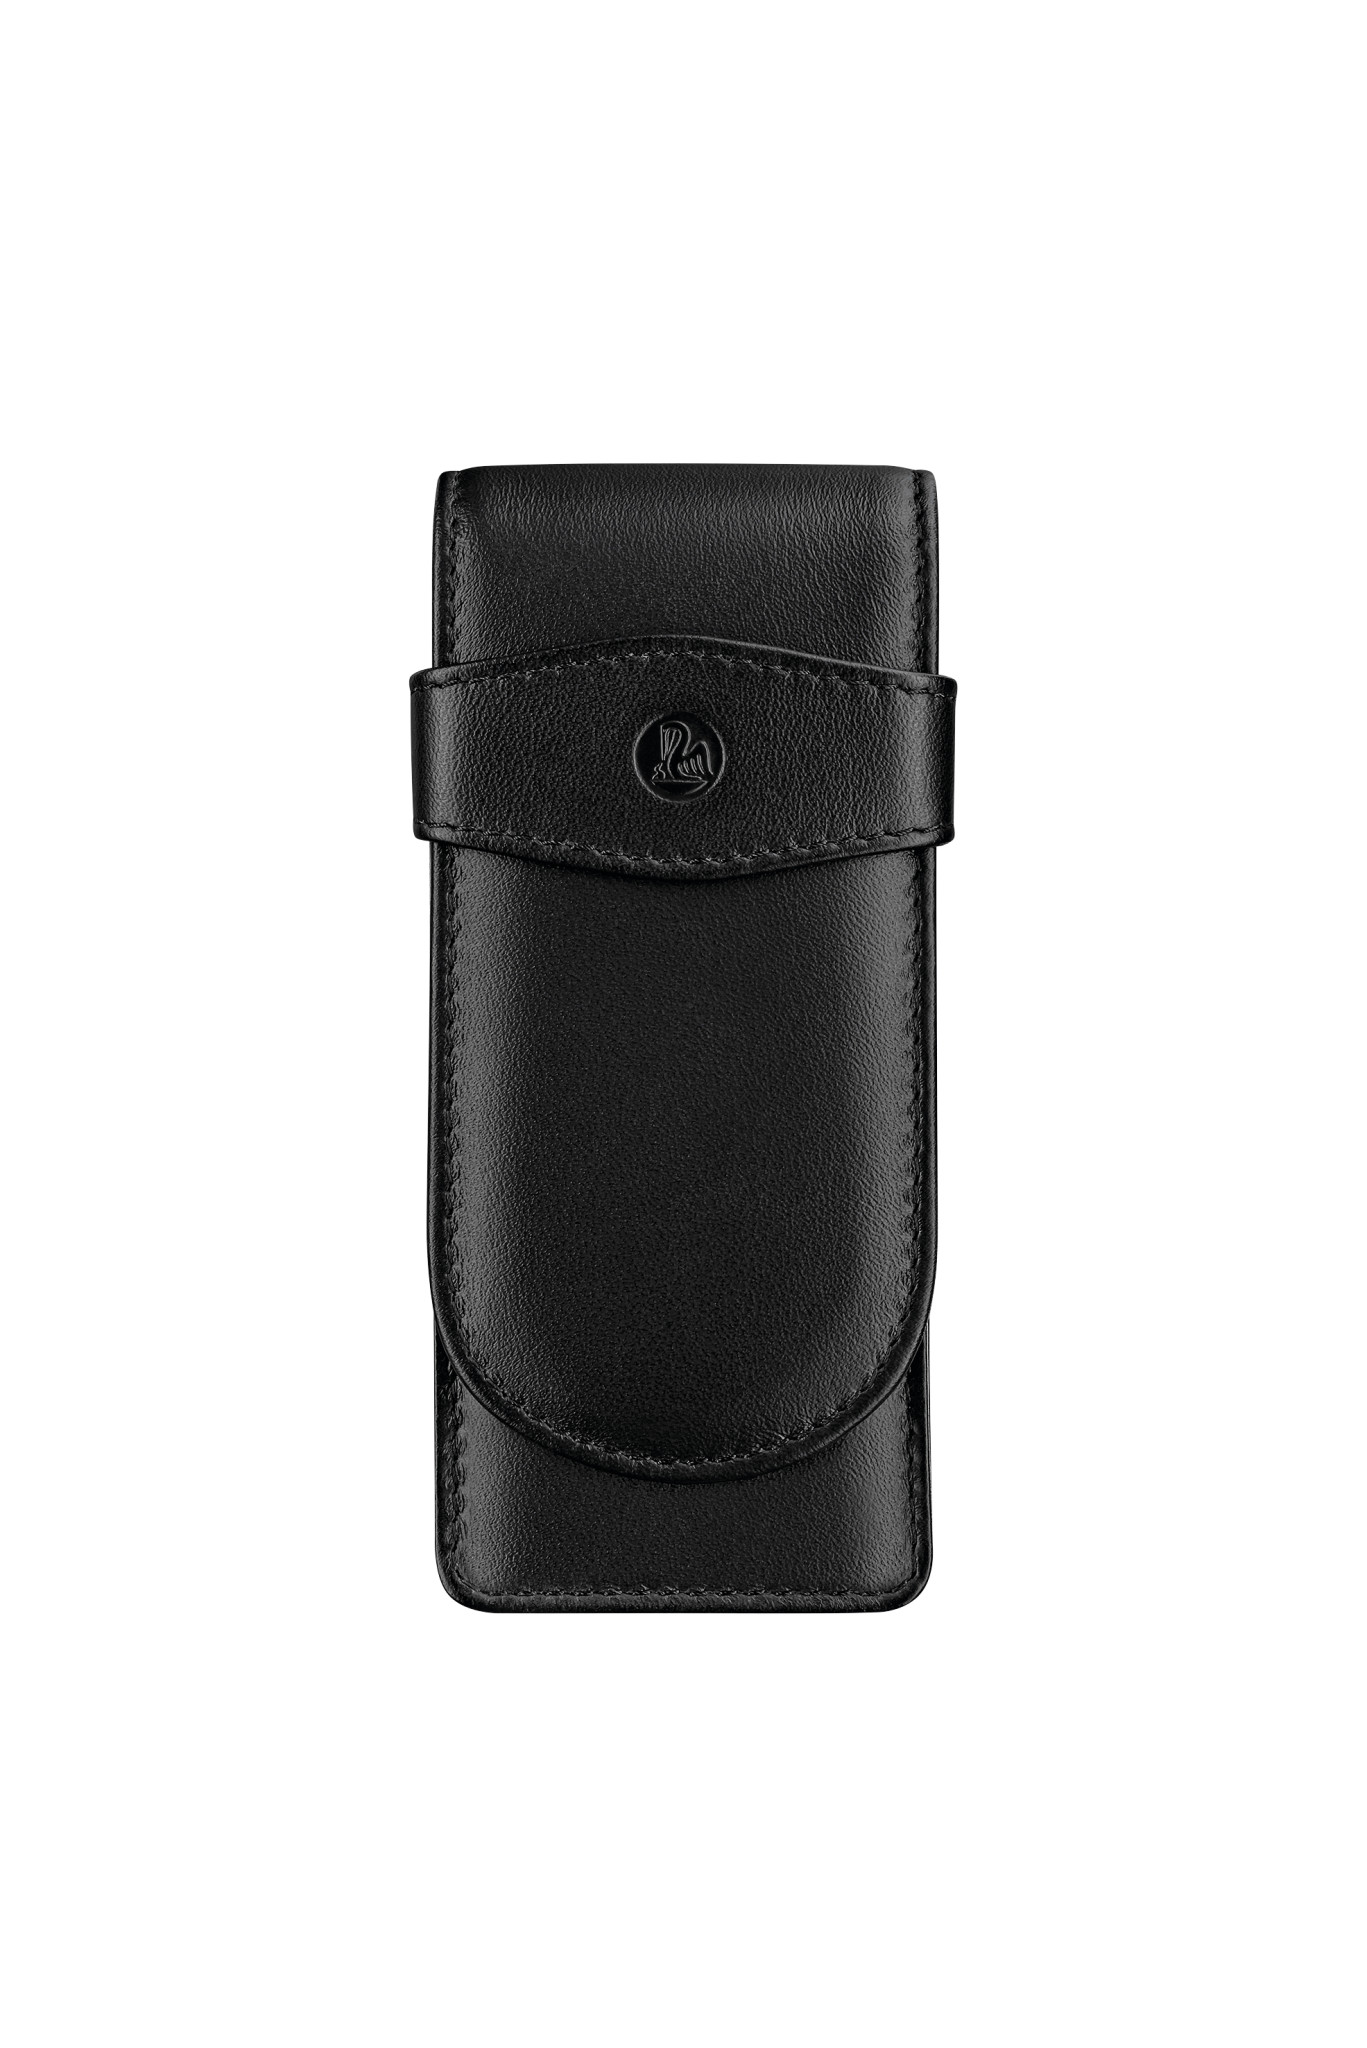 Pelikan Leather Writing Instrument Case TG 31 For Three Writing Instruments, Black